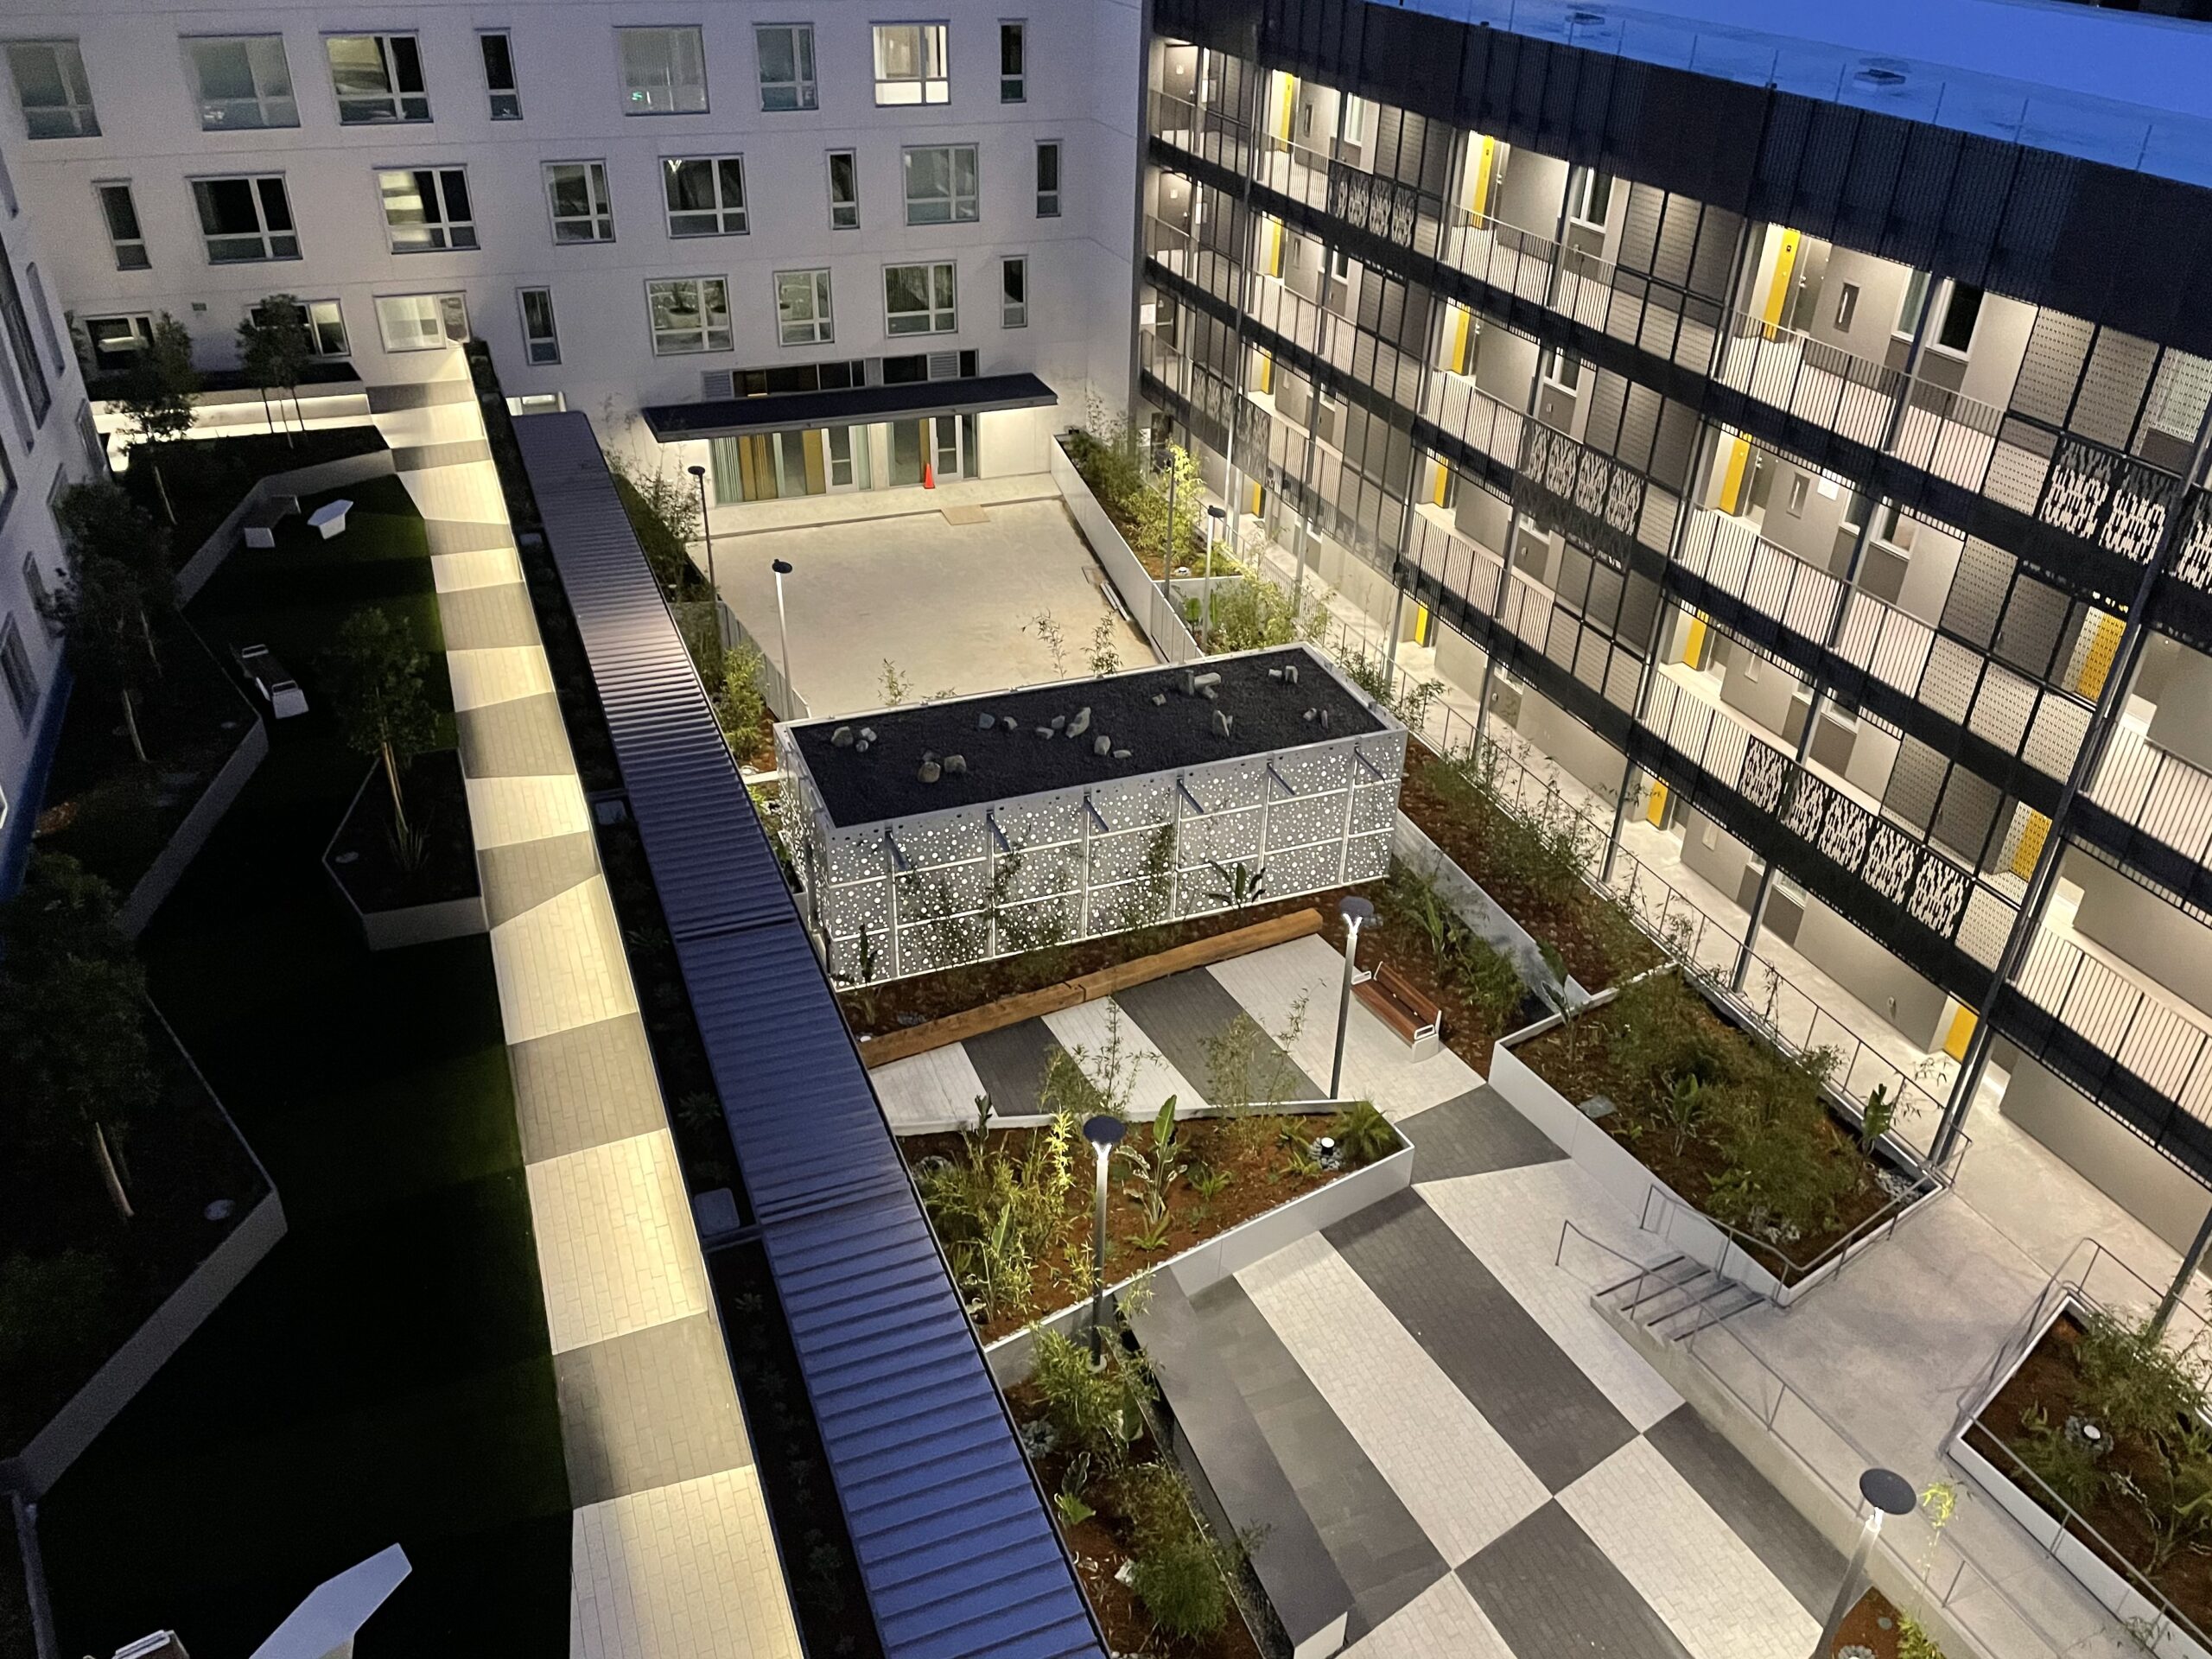 The lighting for the central courtyard balances the requirements of comfort and security, creating a welcoming and hospitable environment. Sister Lillian Murphy Community, Mission Bay. San Francisco, California © Karl Vinge